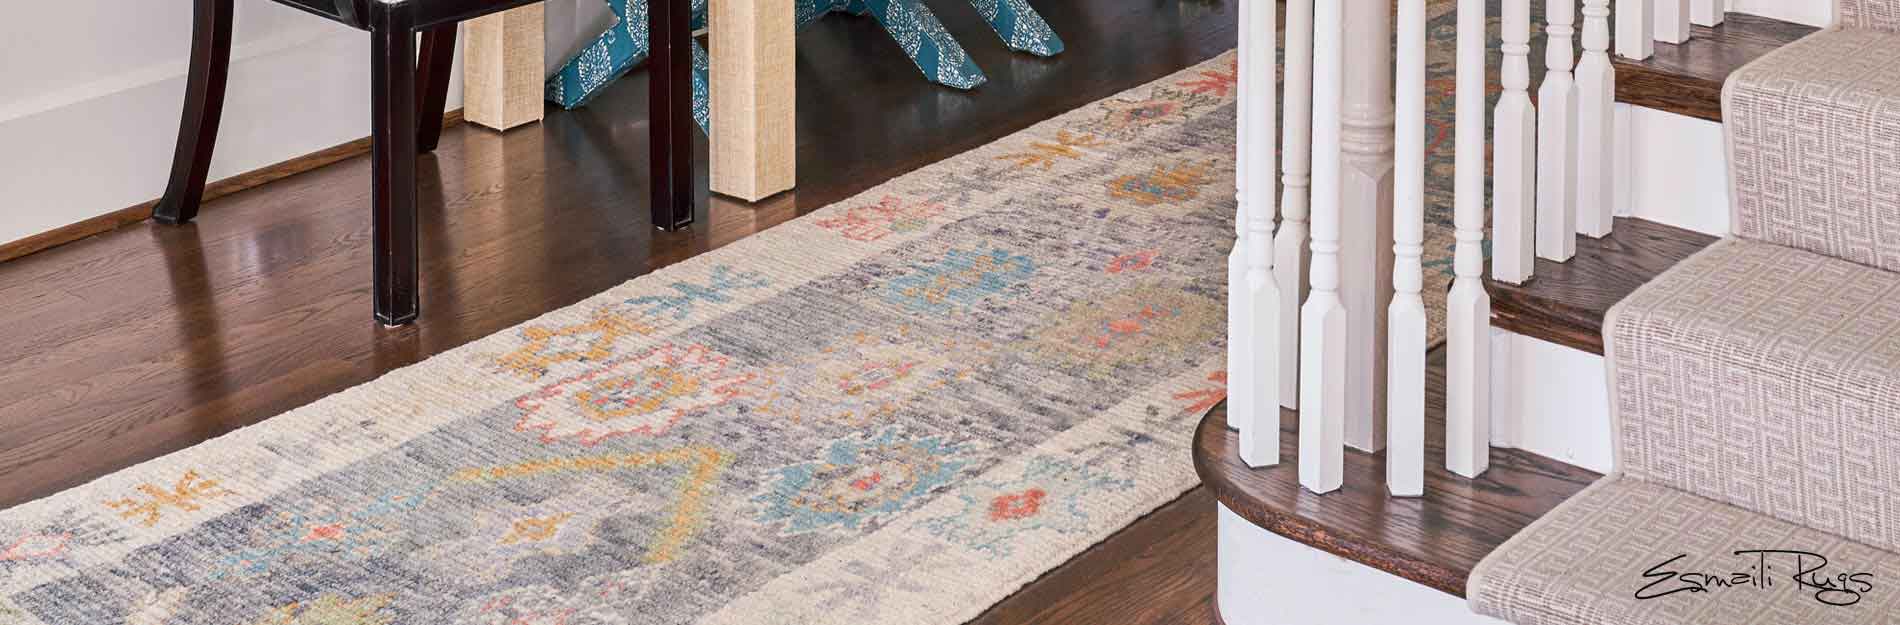 Colorful Pastel Modern Style Oushak Rugs Carpet Runners